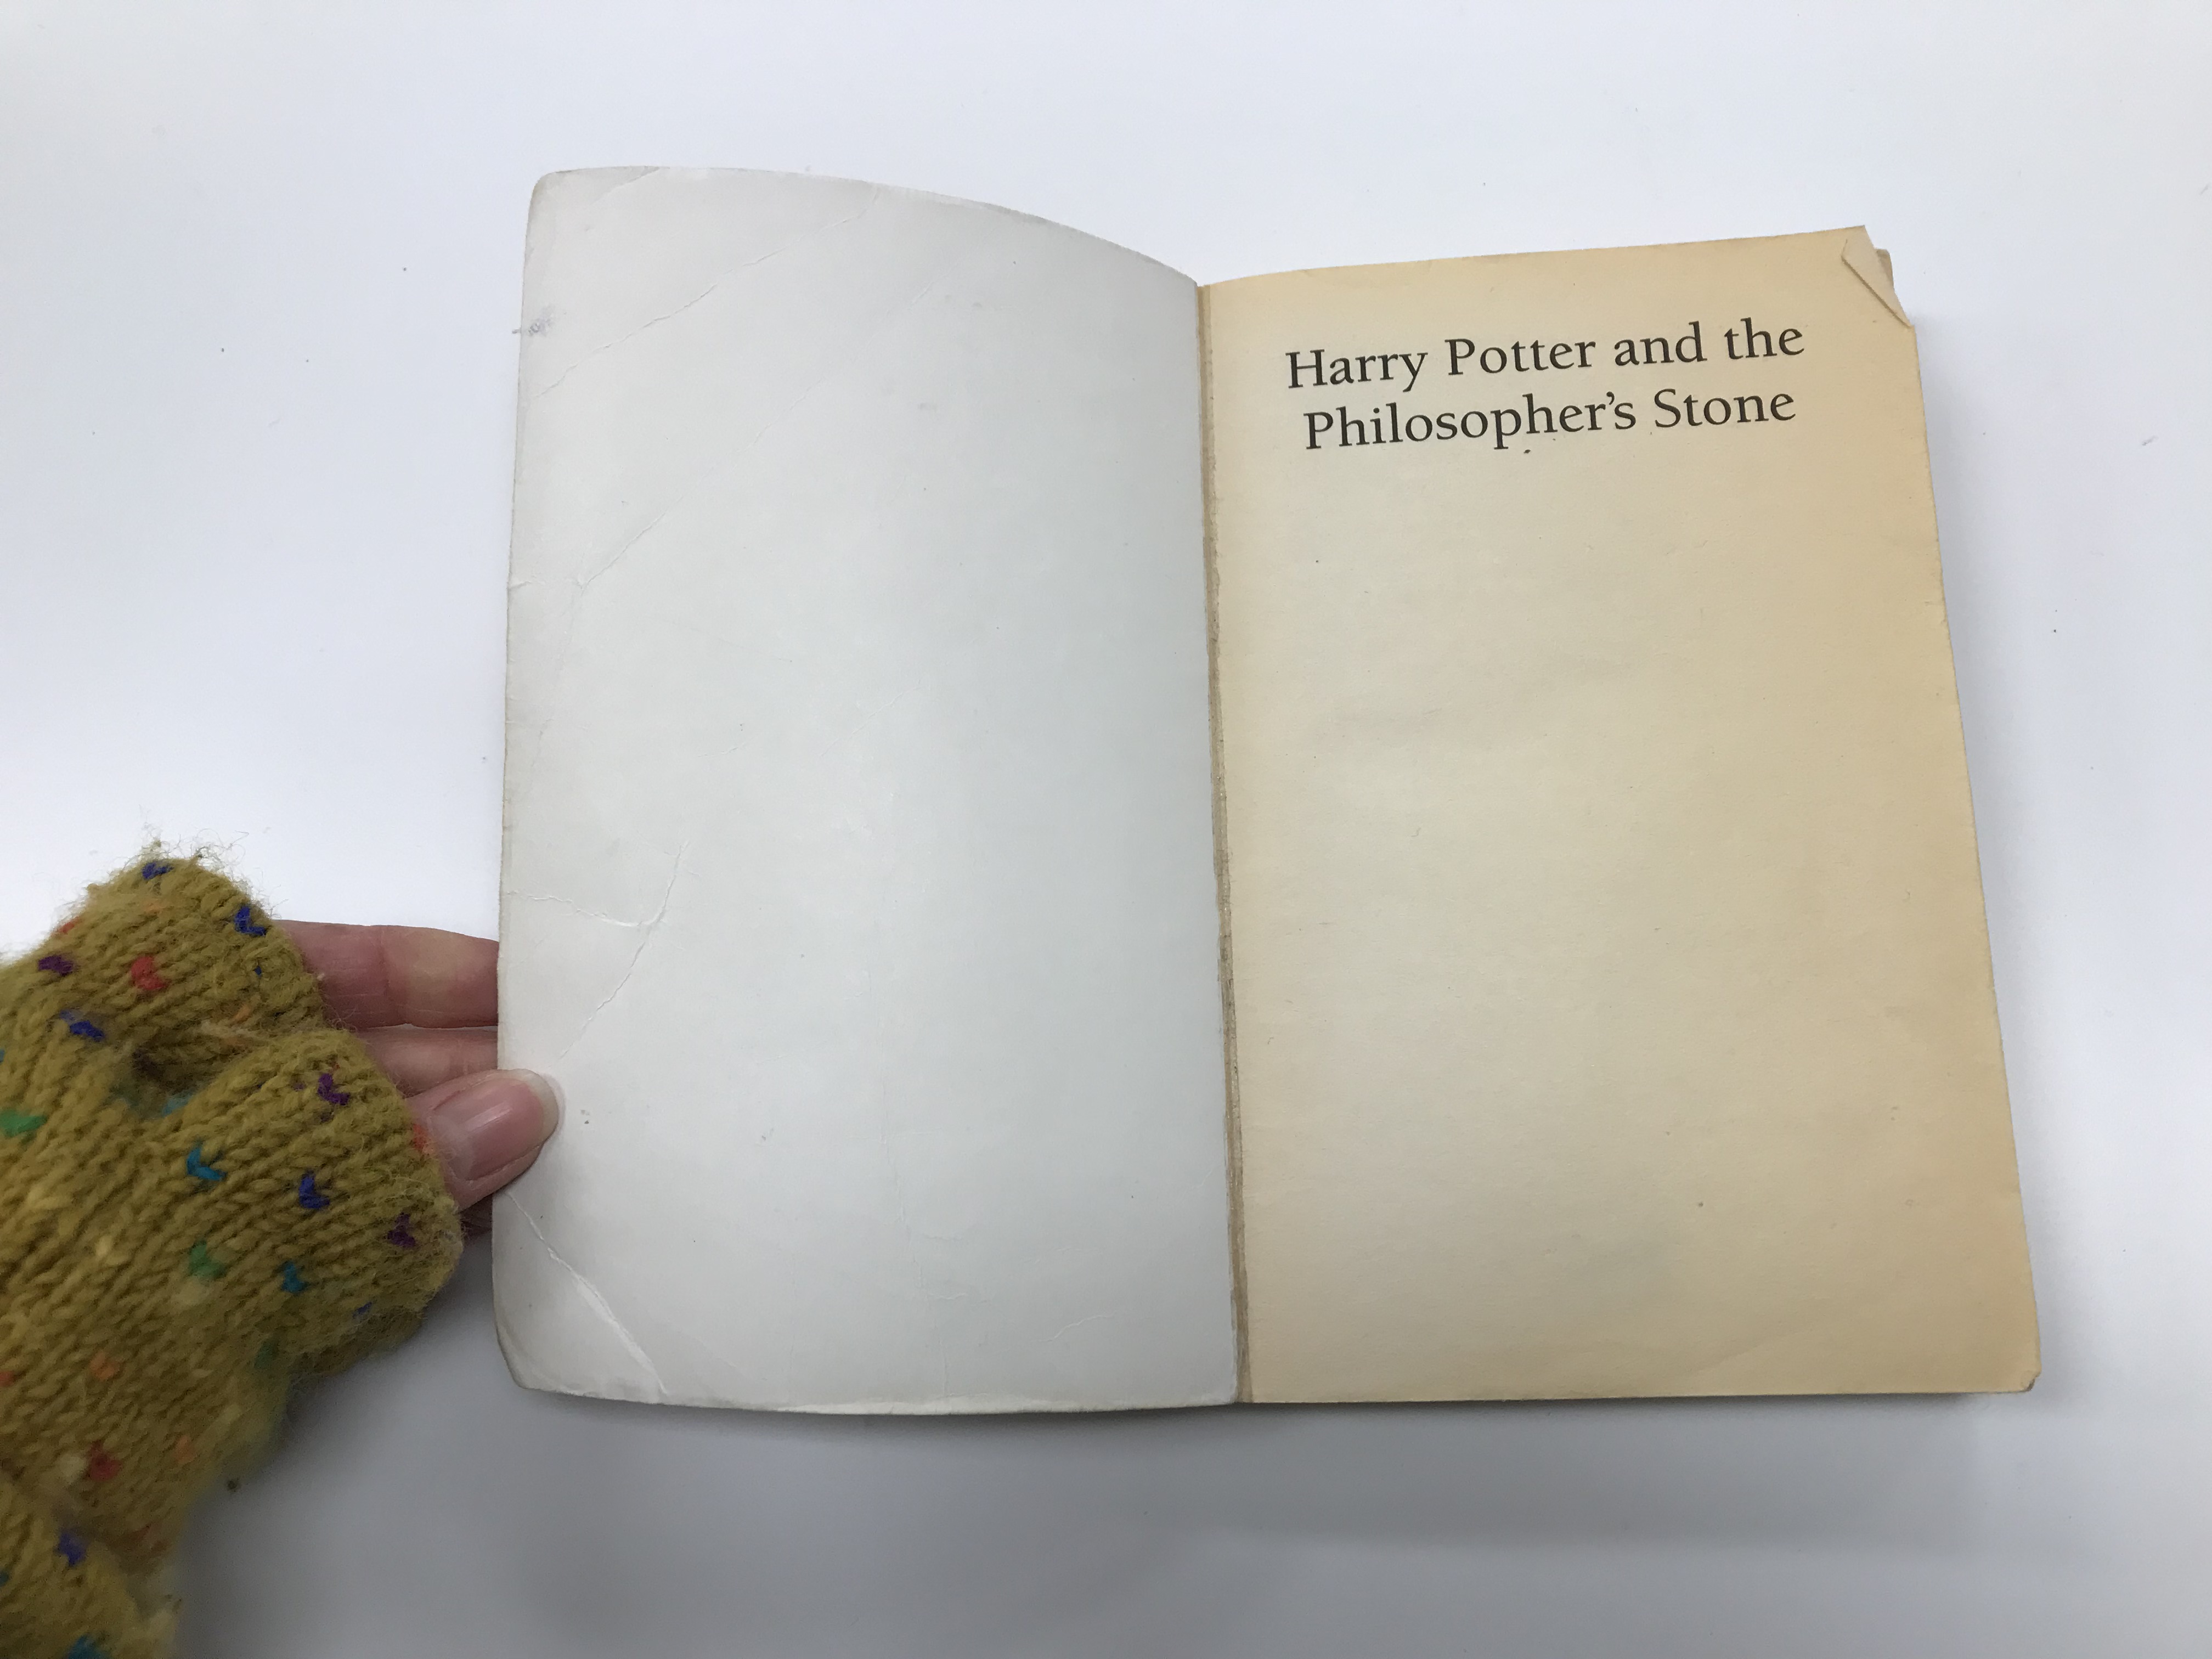 J K ROWLING "Harry Potter and The Philosopher's Stone", first edition, paperback, - Image 20 of 30